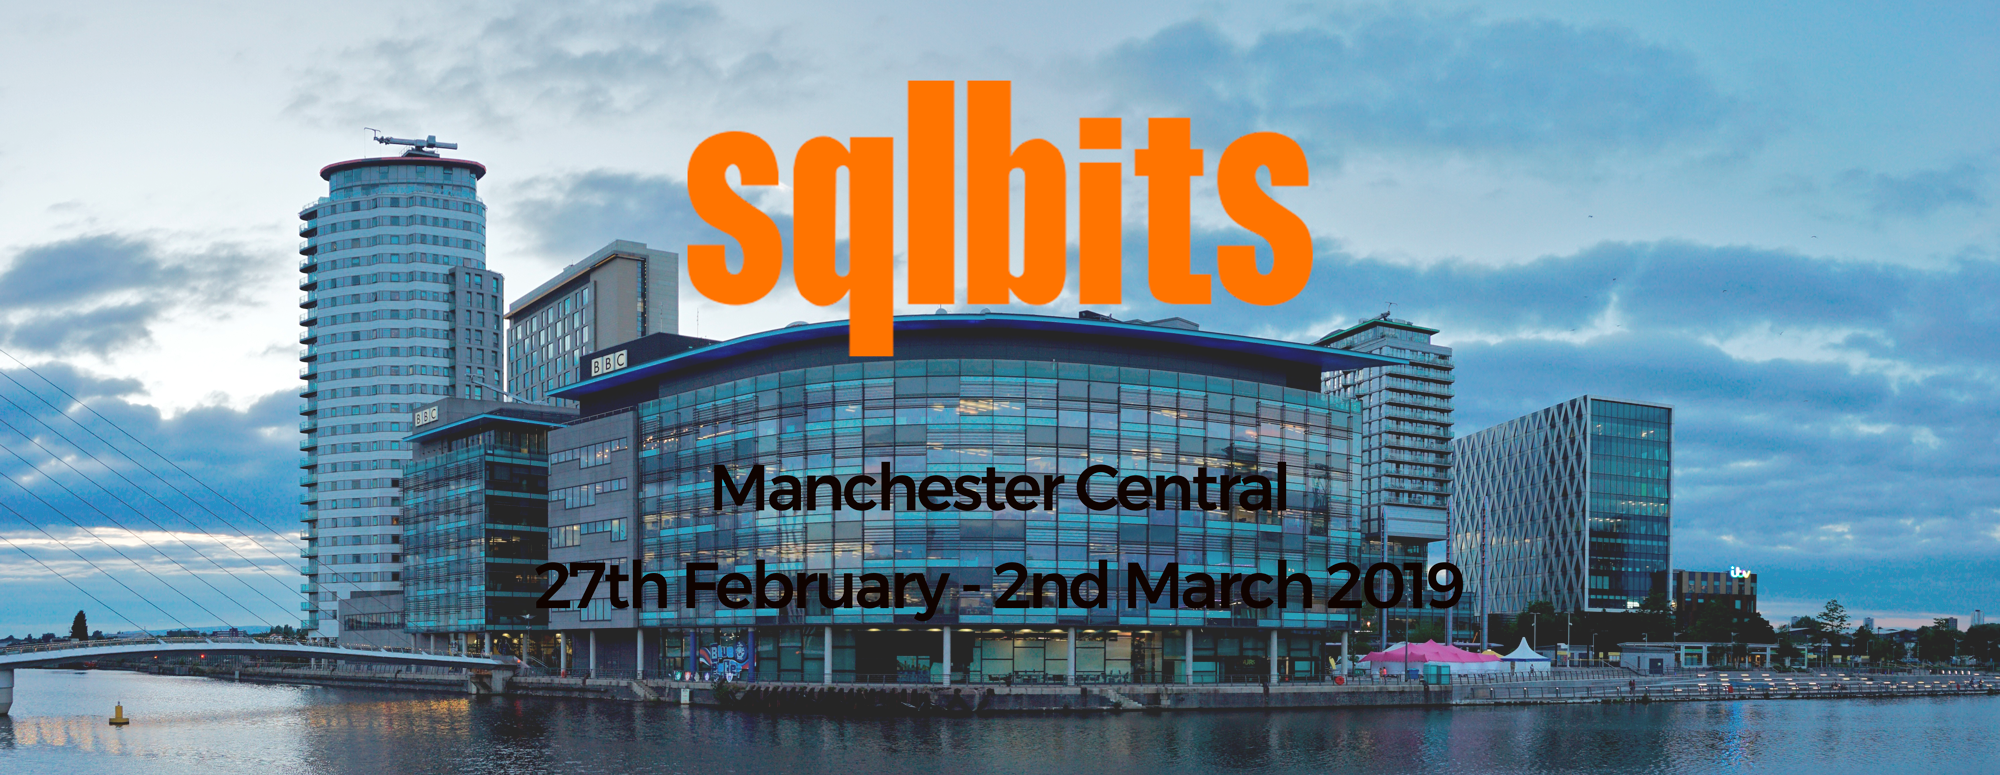 Why you should attend SQLBits 2019 in Manchester, UK